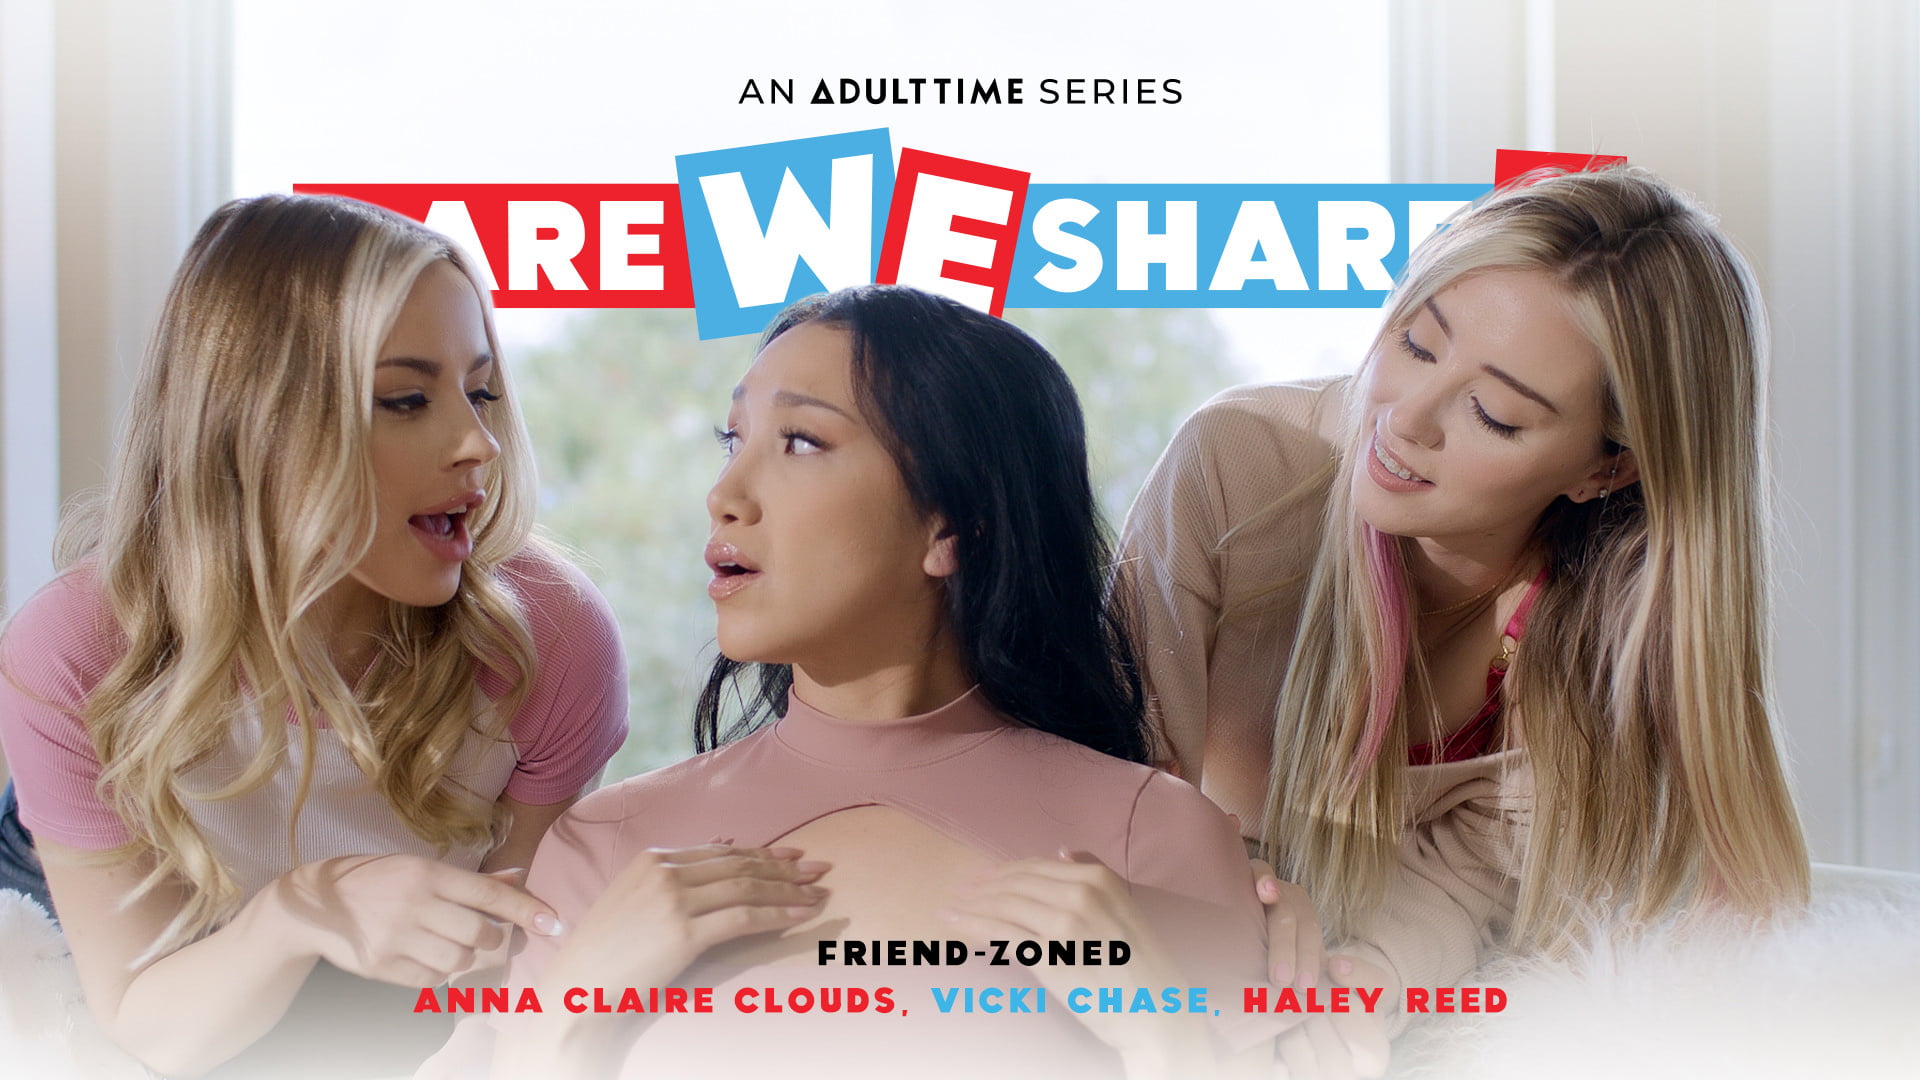 DareWeShare &#8211; Vicki Chase, Haley Reed And Anna Claire Clouds &#8211; Friend-Zoned, Perverzija.com